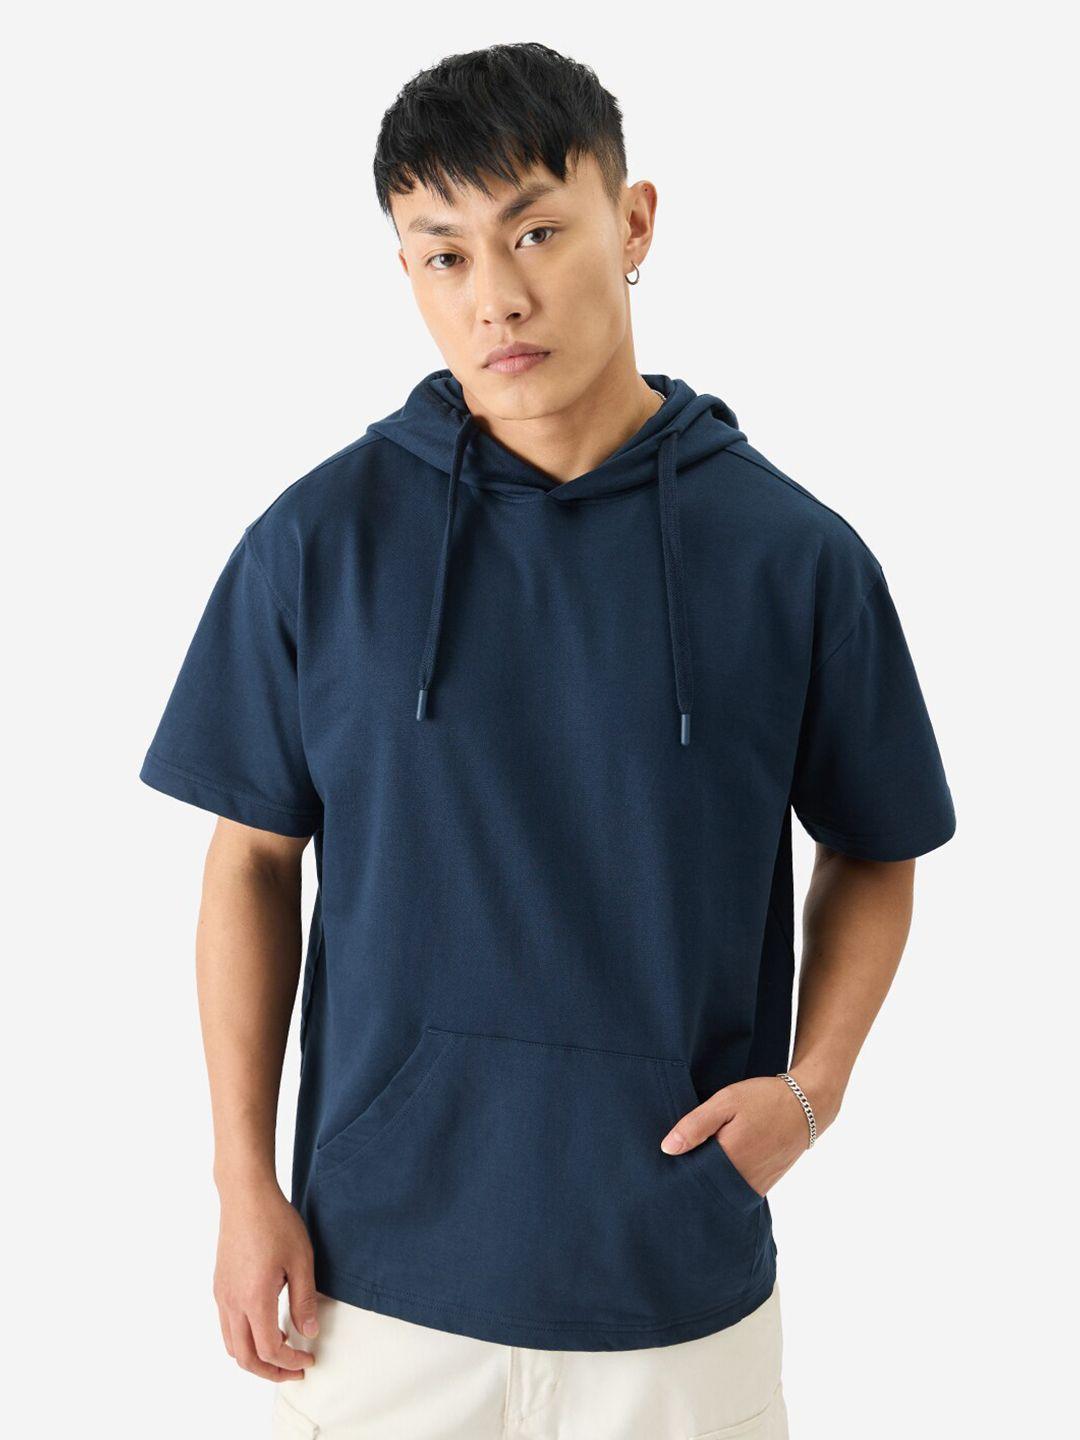 the souled store men hooded pockets t-shirt